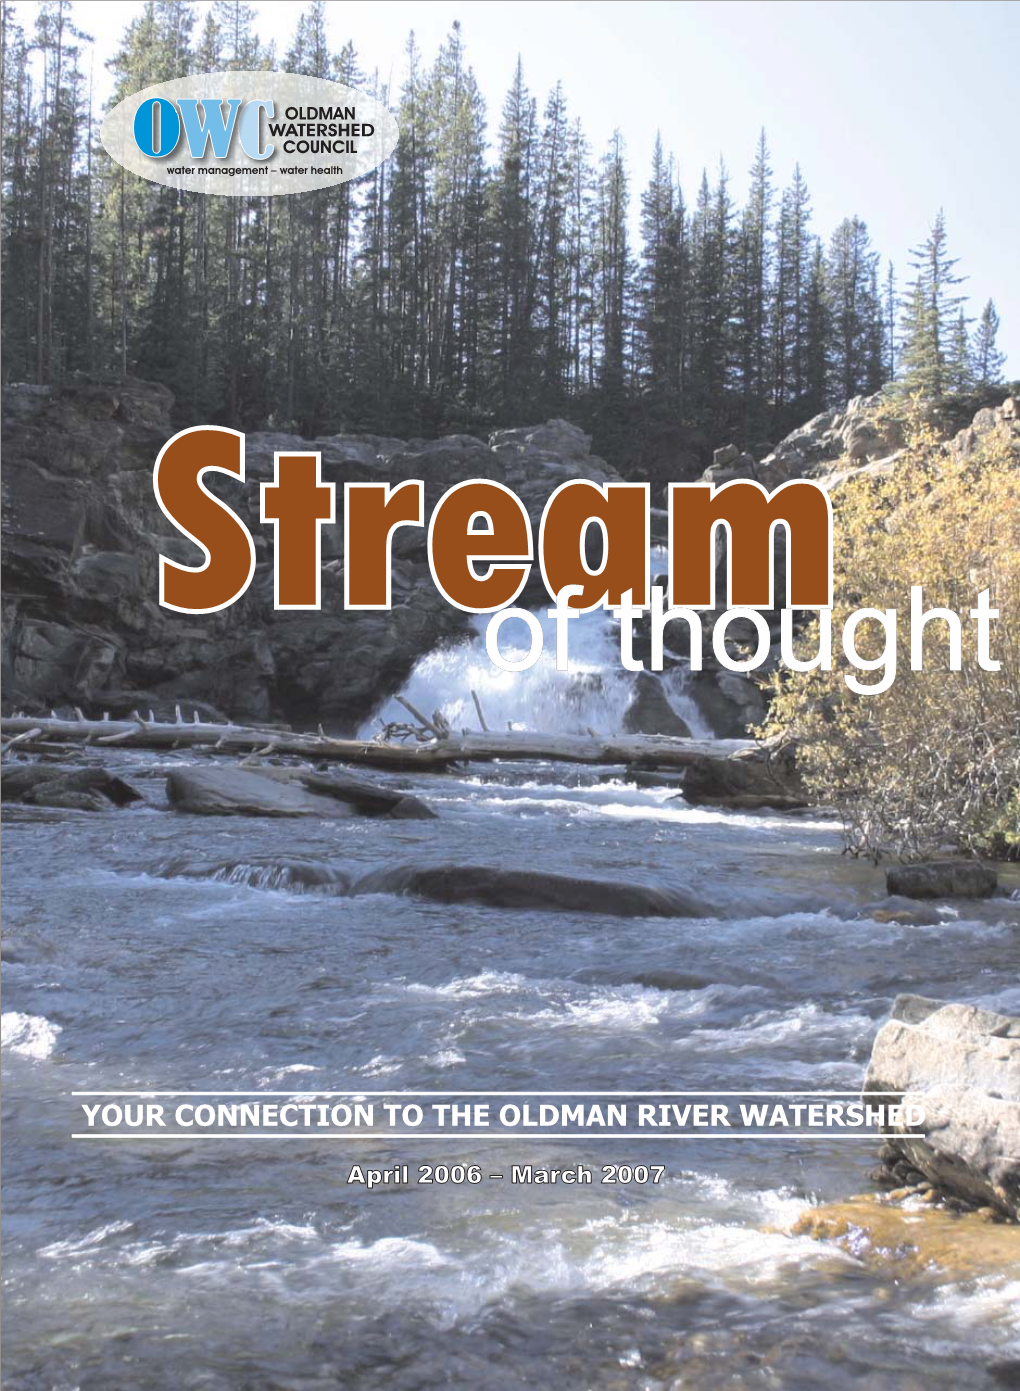 Your Connection to the Oldman River Watershed